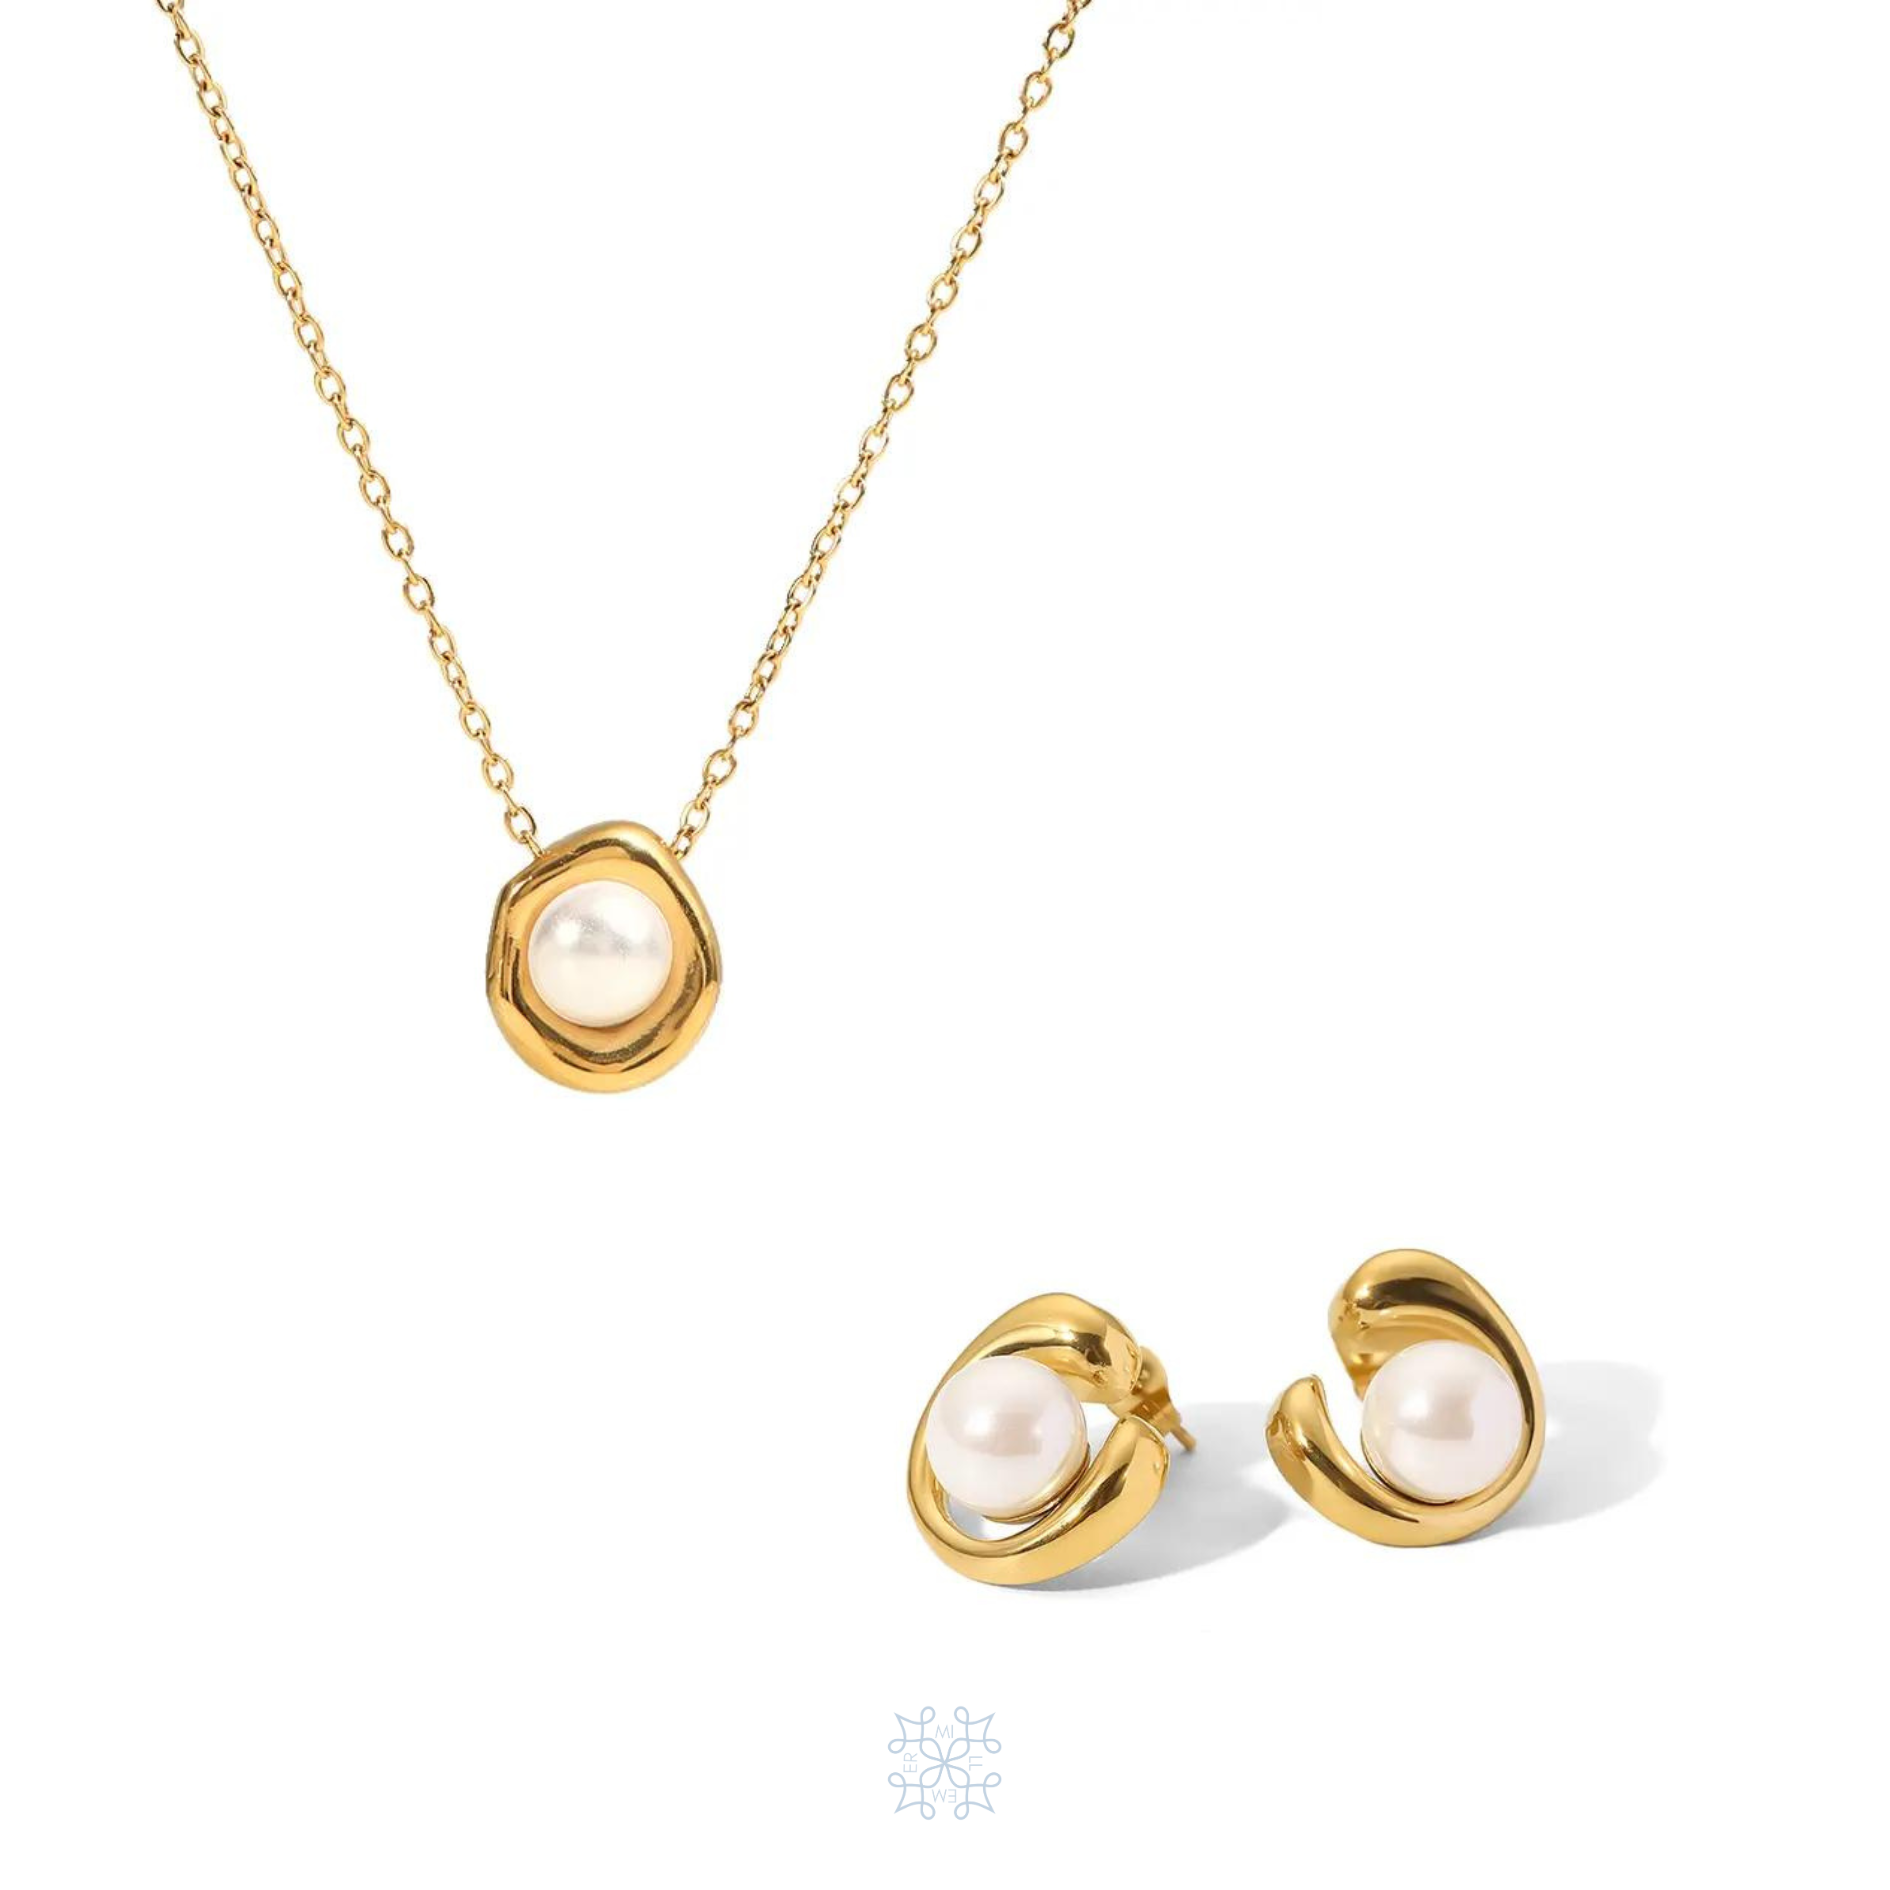 CLAM Pearl Gold Set Necklace and Earrings. Gold irregular oval shape pendant with a pearl in the middle. Gold stud earrings with e pearl attached in the middle. 